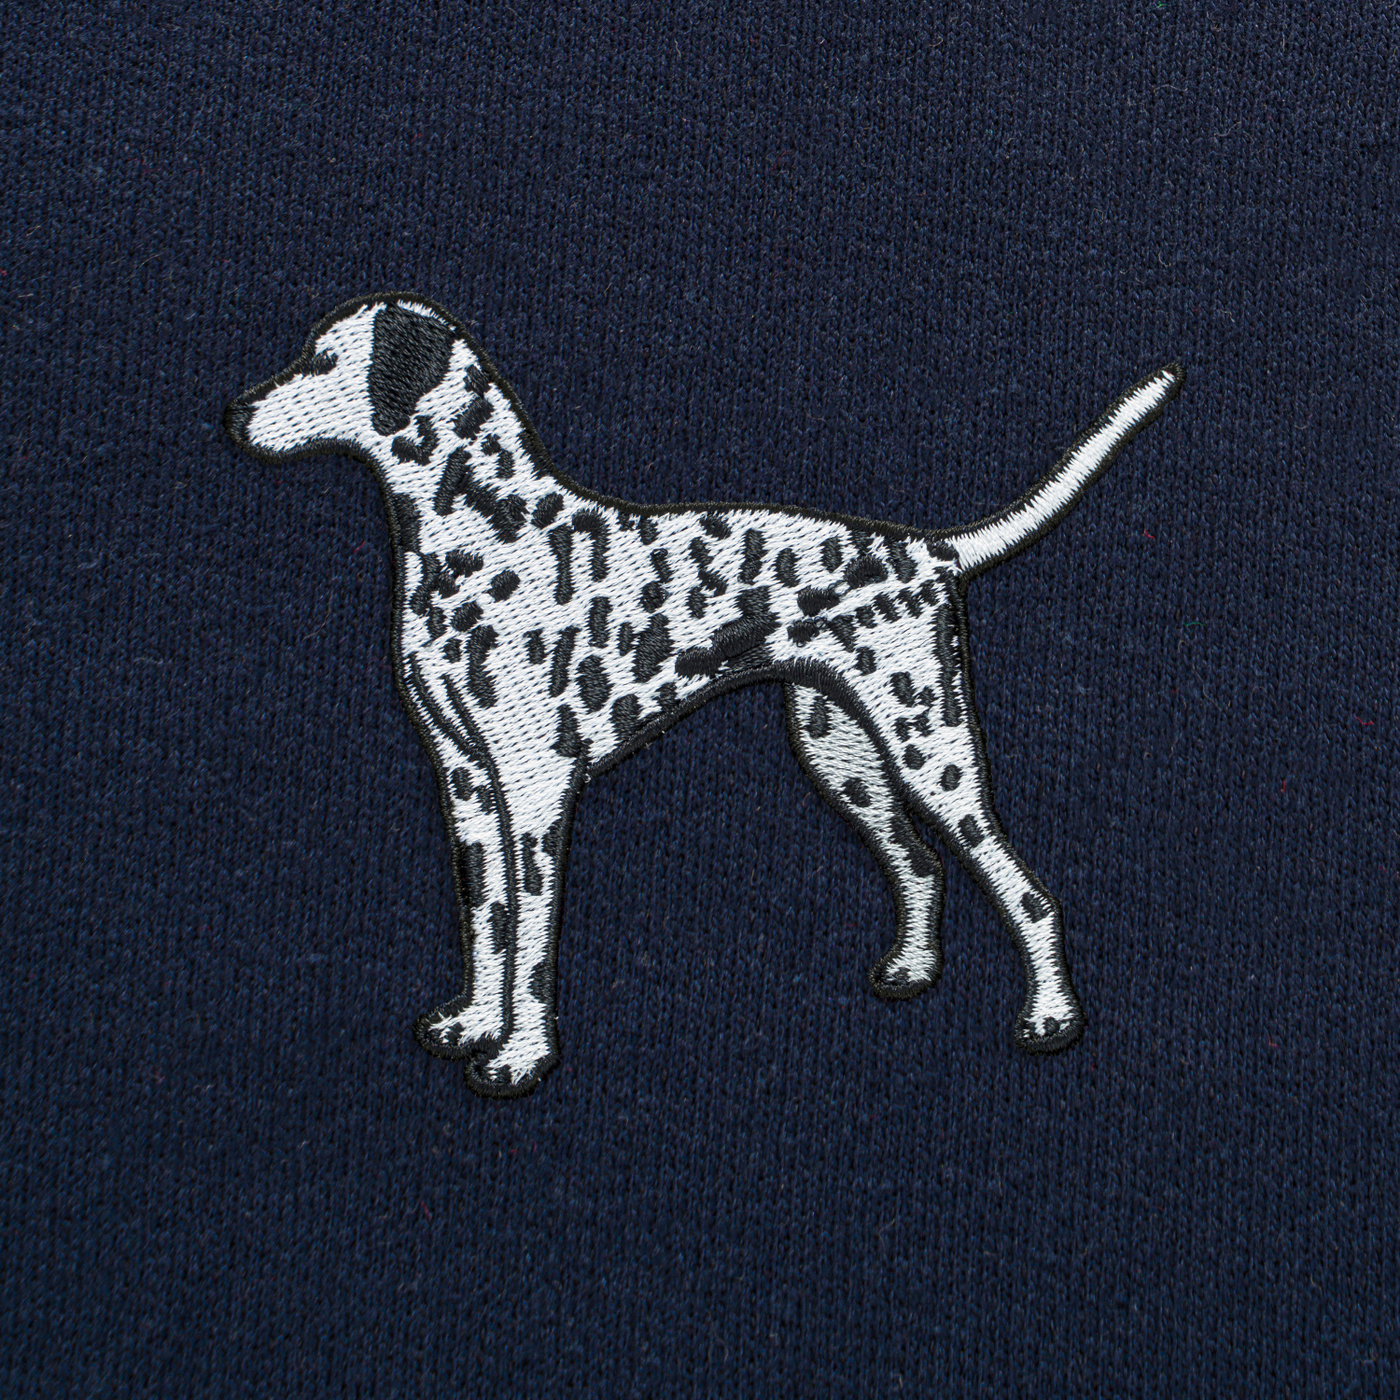 Bobby's Planet Women's Embroidered Dalmatian Hoodie from Paws Dog Cat Animals Collection in Navy Color#color_navy